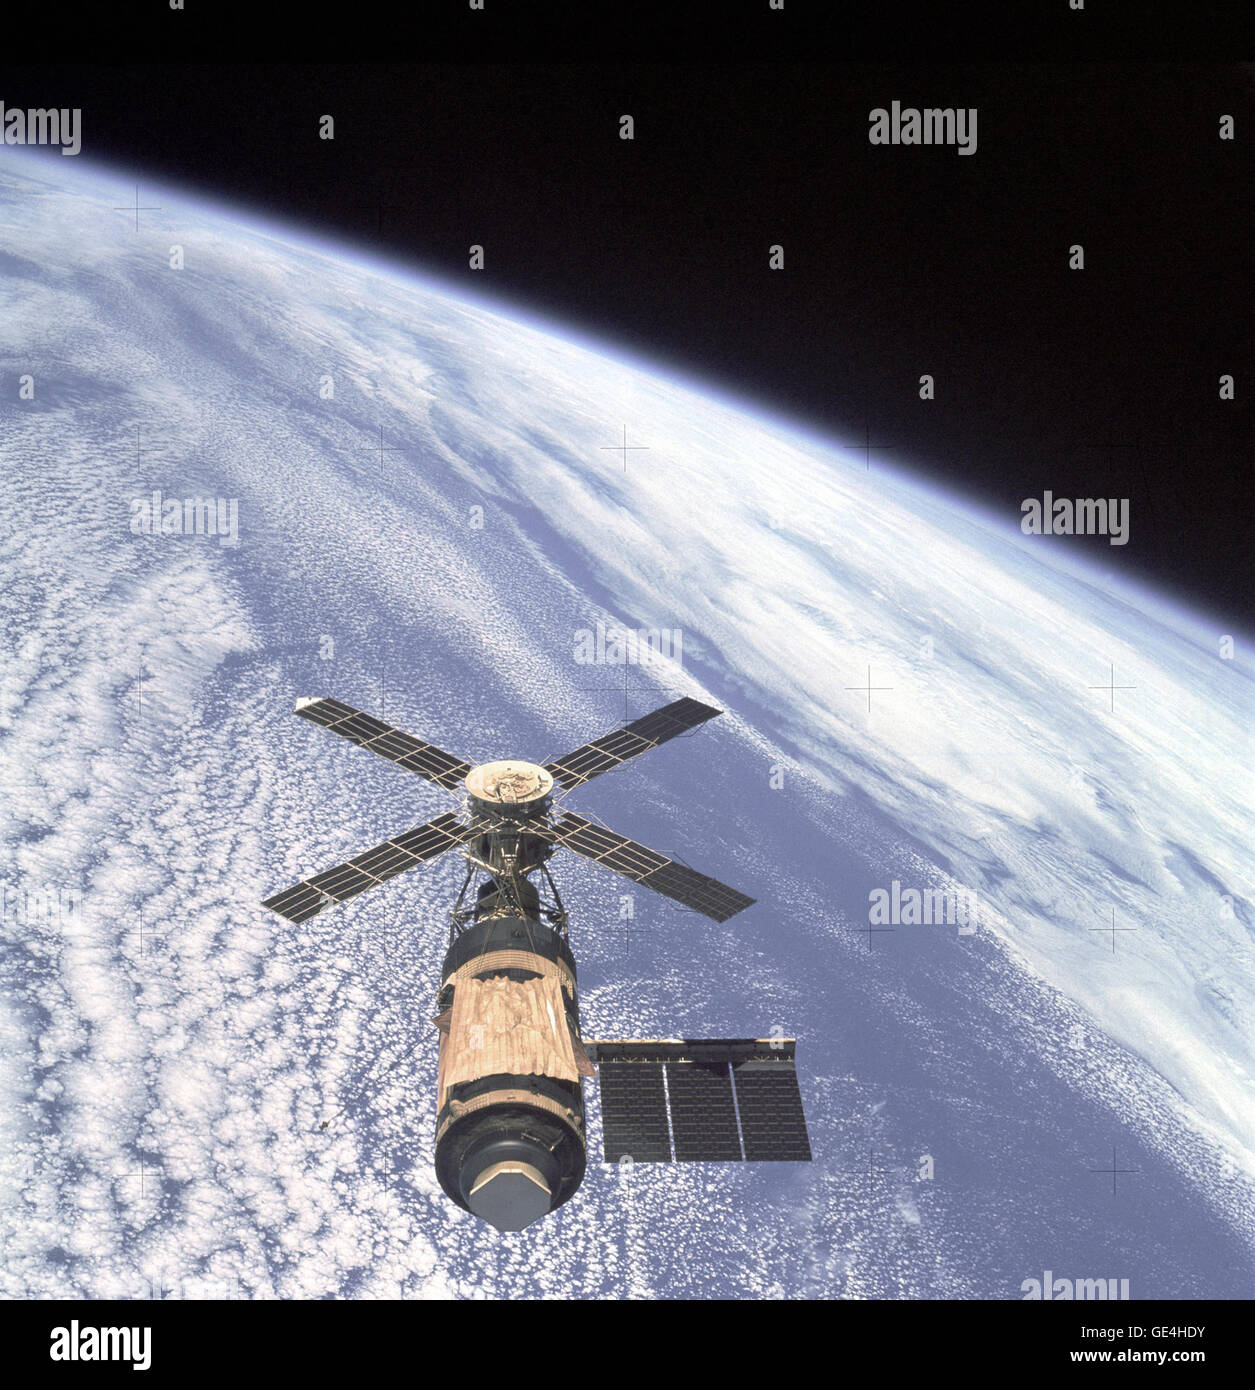 An overhead view of the Skylab Orbital Workshop in Earth orbit as photographed from the Skylab 4 Command and Service Modules (CSM) during the final fly-around by the CSM before returning home. The space station is contrasted against the pale blue Earth. During launch on May 14, 1973, some 63 seconds into flight, the micrometeor shield on the Orbital Workshop (OWS) experienced a failure that caused it to be caught up in the supersonic air flow during ascent. This ripped the shield from the OWS and damaged the tie downs that secured one of the solar array systems. Complete loss of one of the sol Stock Photo